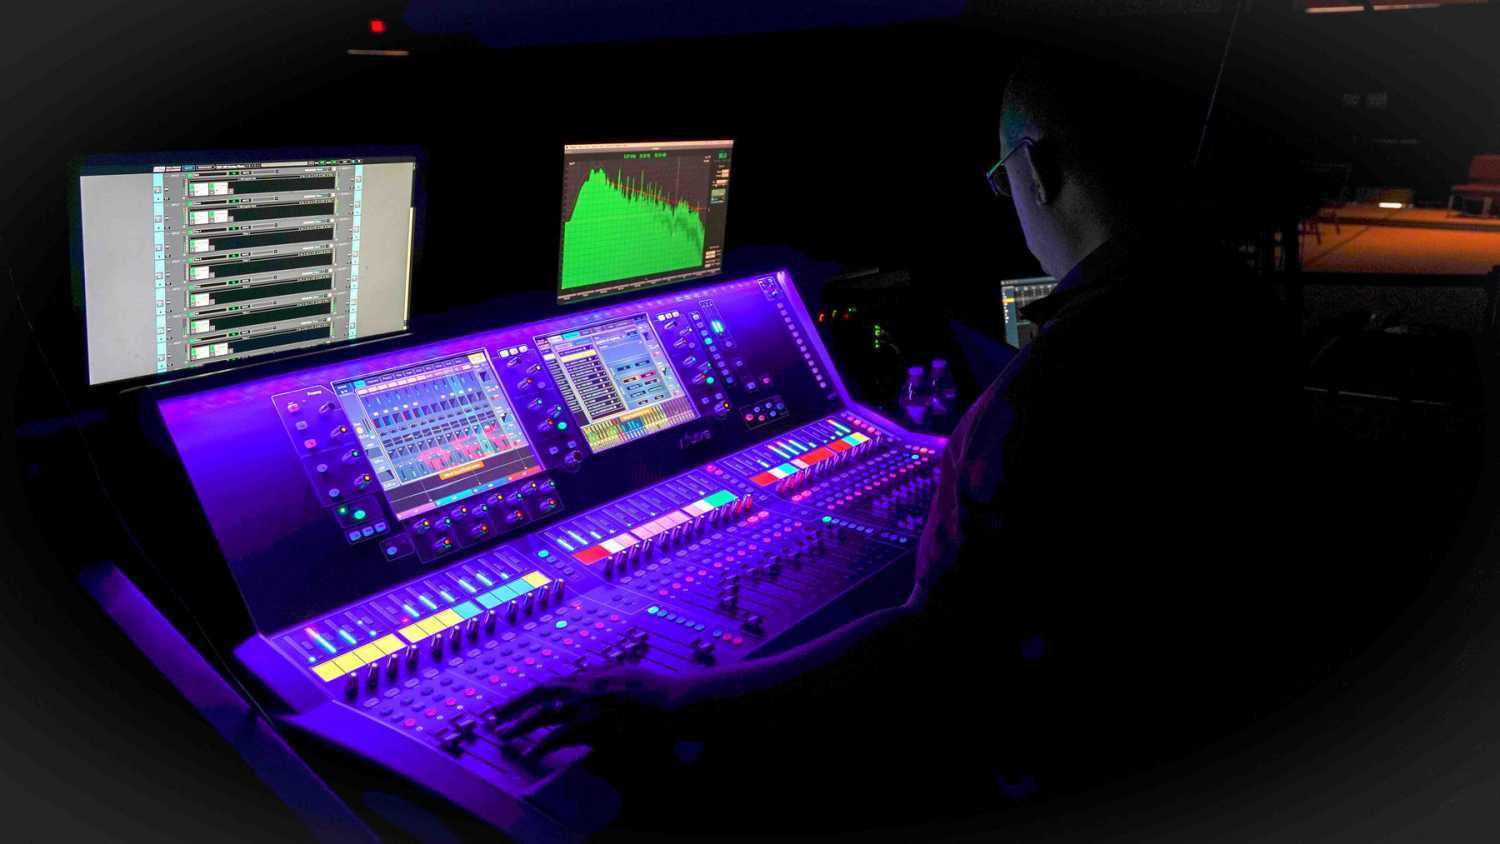 Calvary Chapel Las Vegas supports its services with an Allen & Heath dLive system